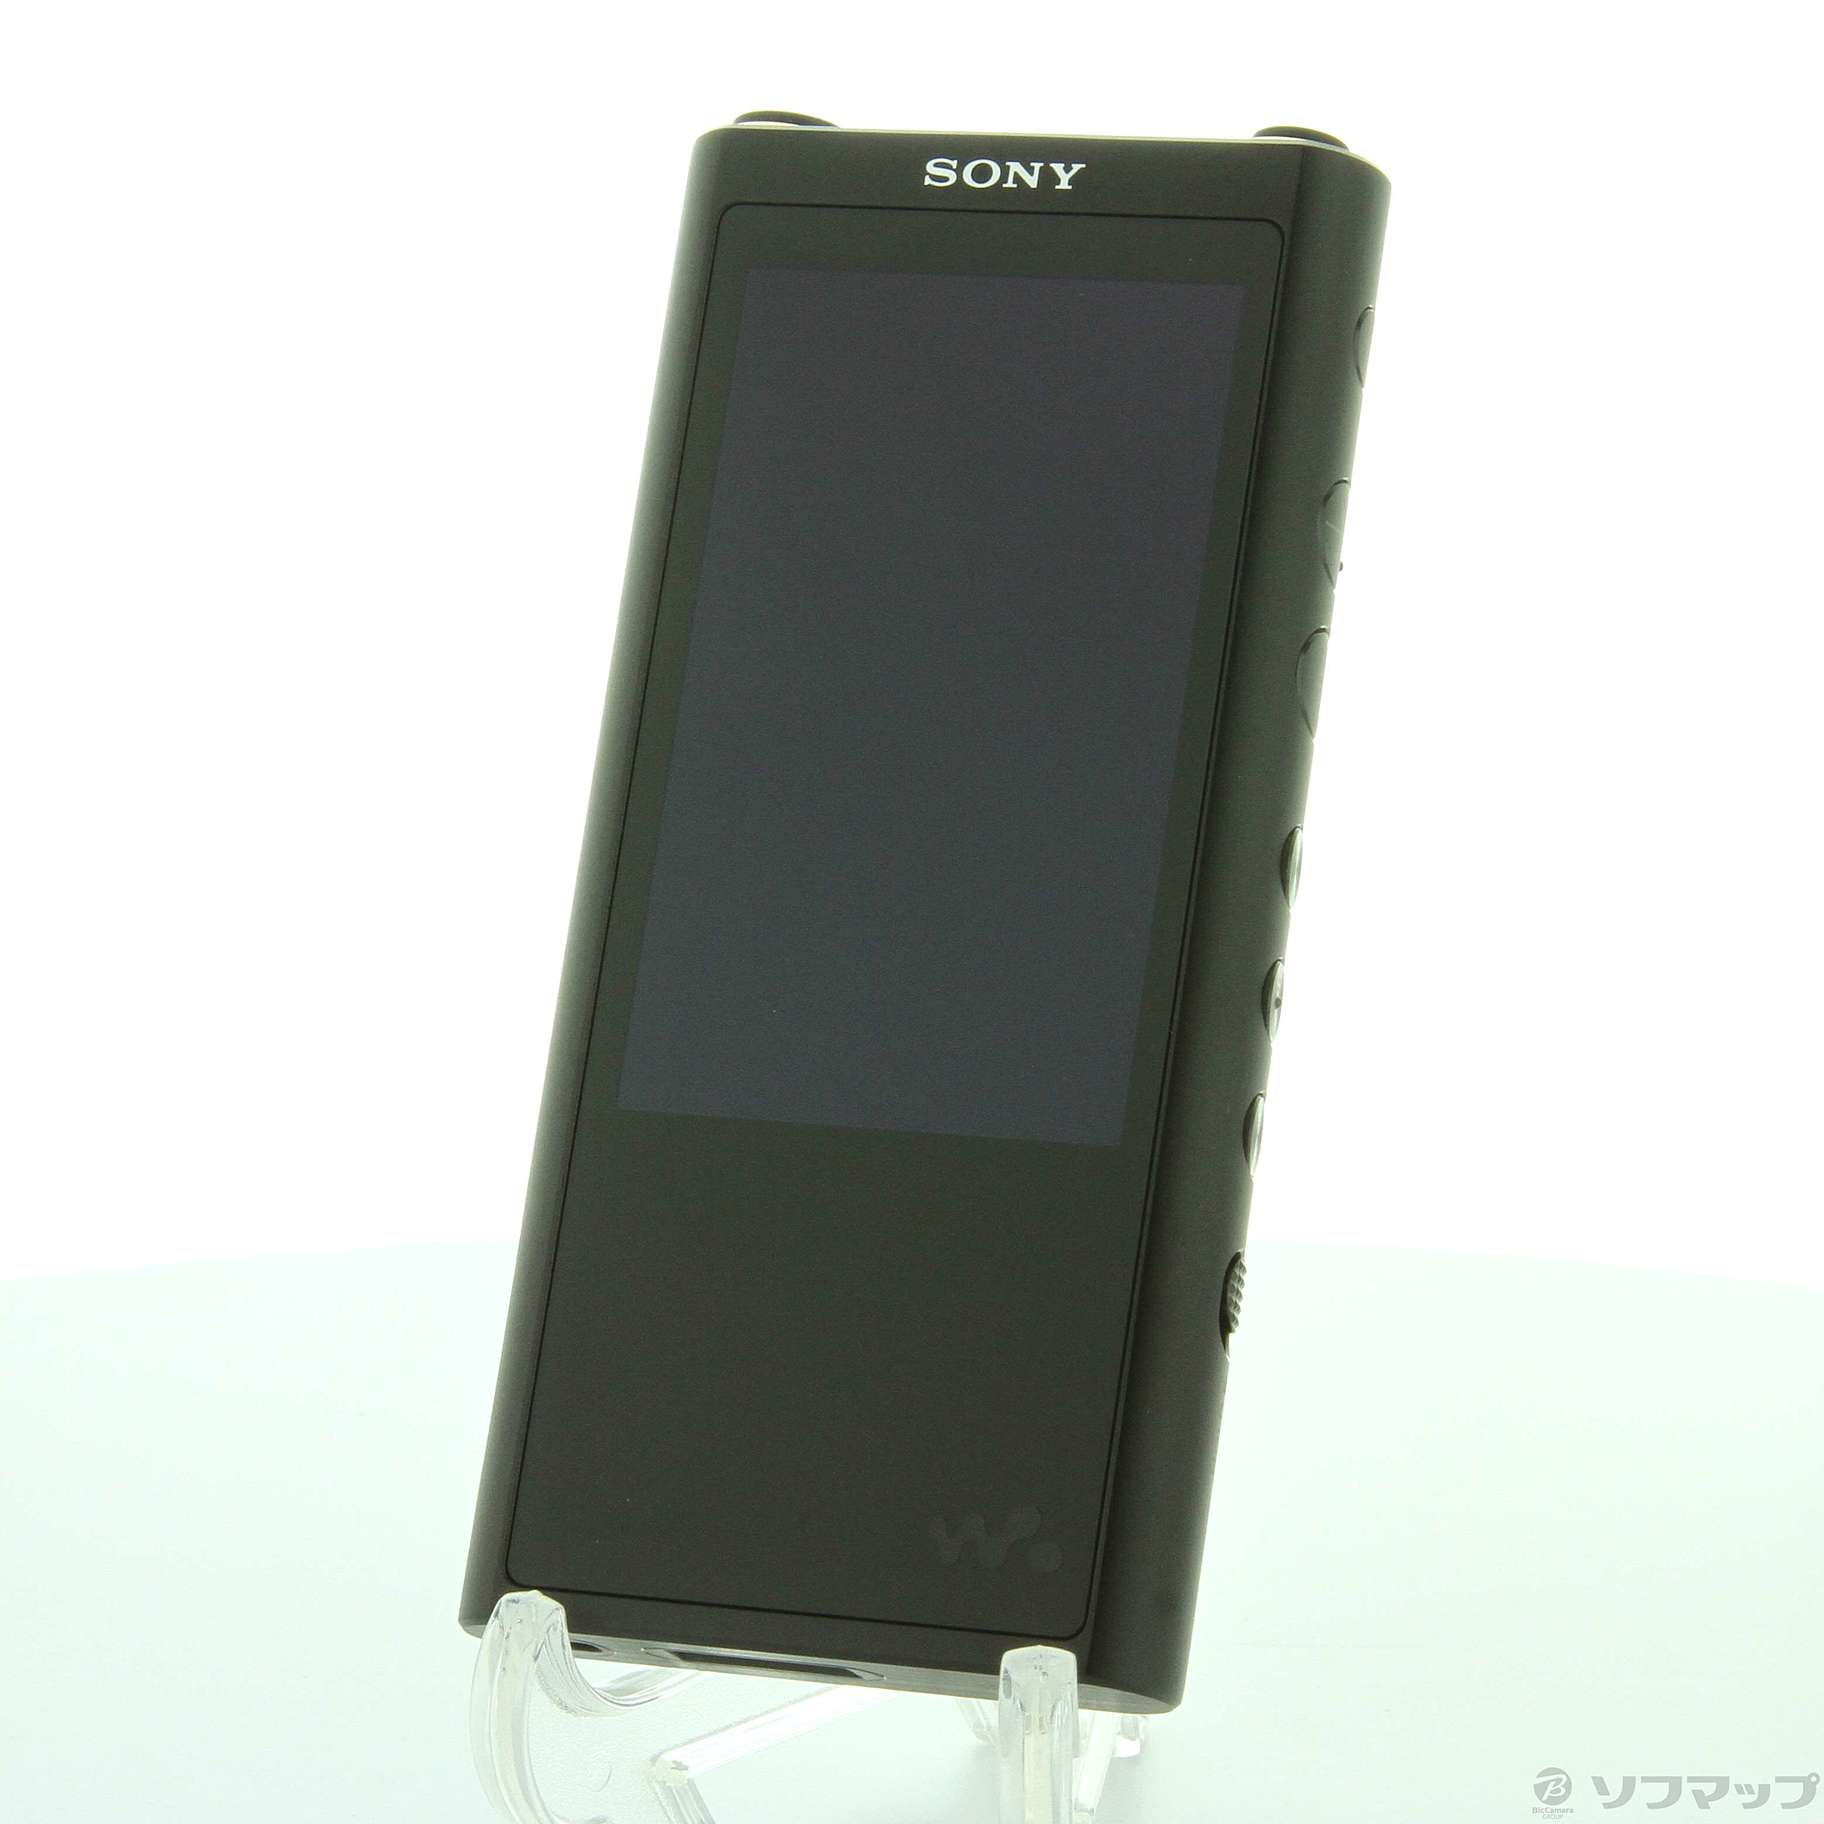 SONY ウォークマン ZX NW-ZX300(B) 64GB